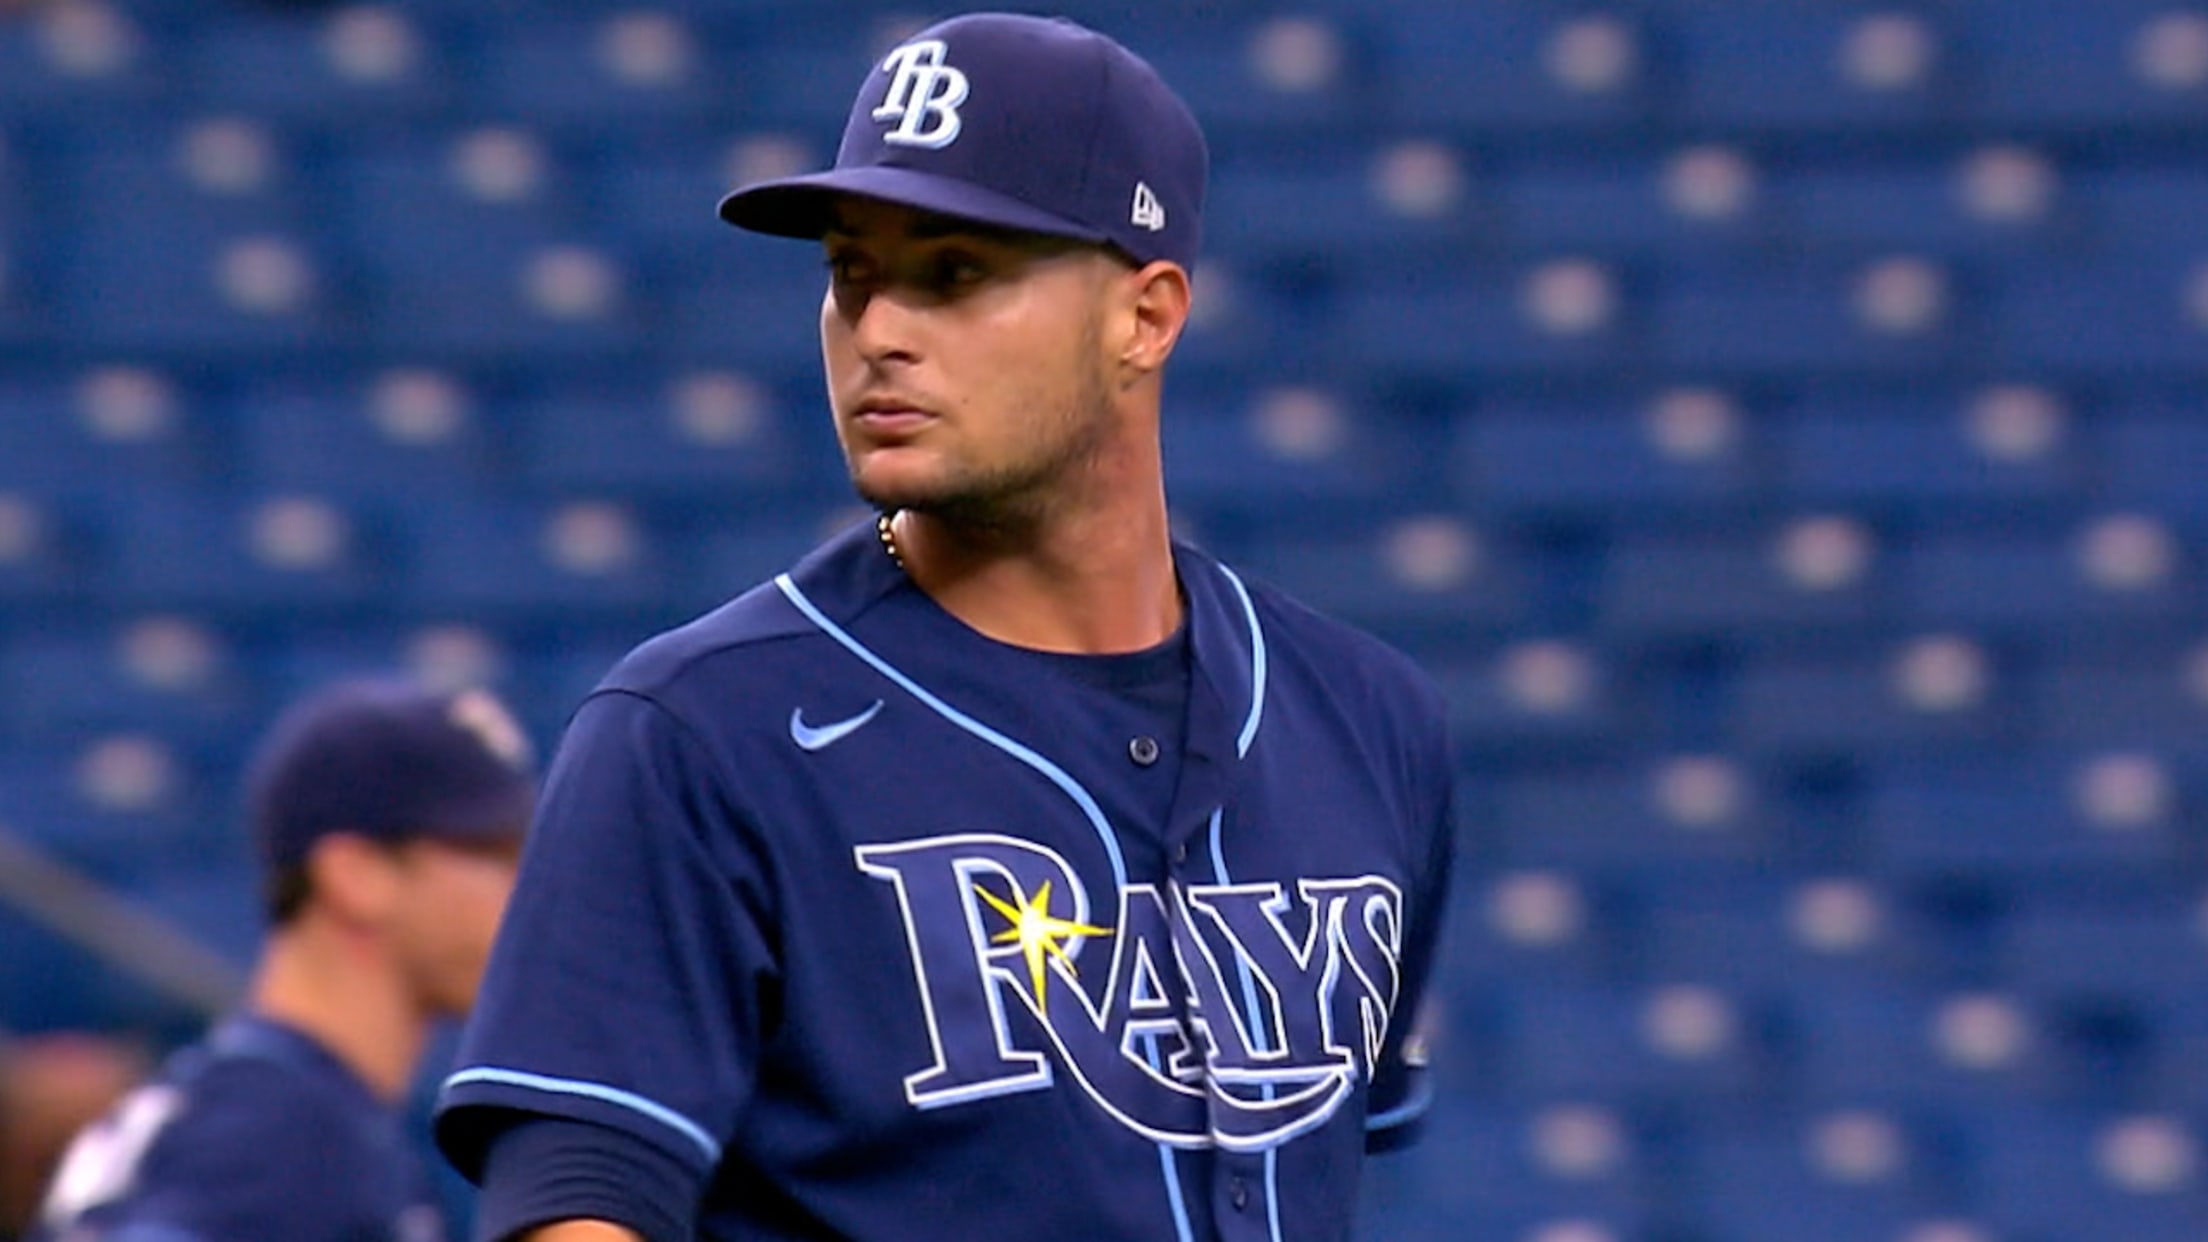 Shane McClanahan among Rays' spring roster cuts